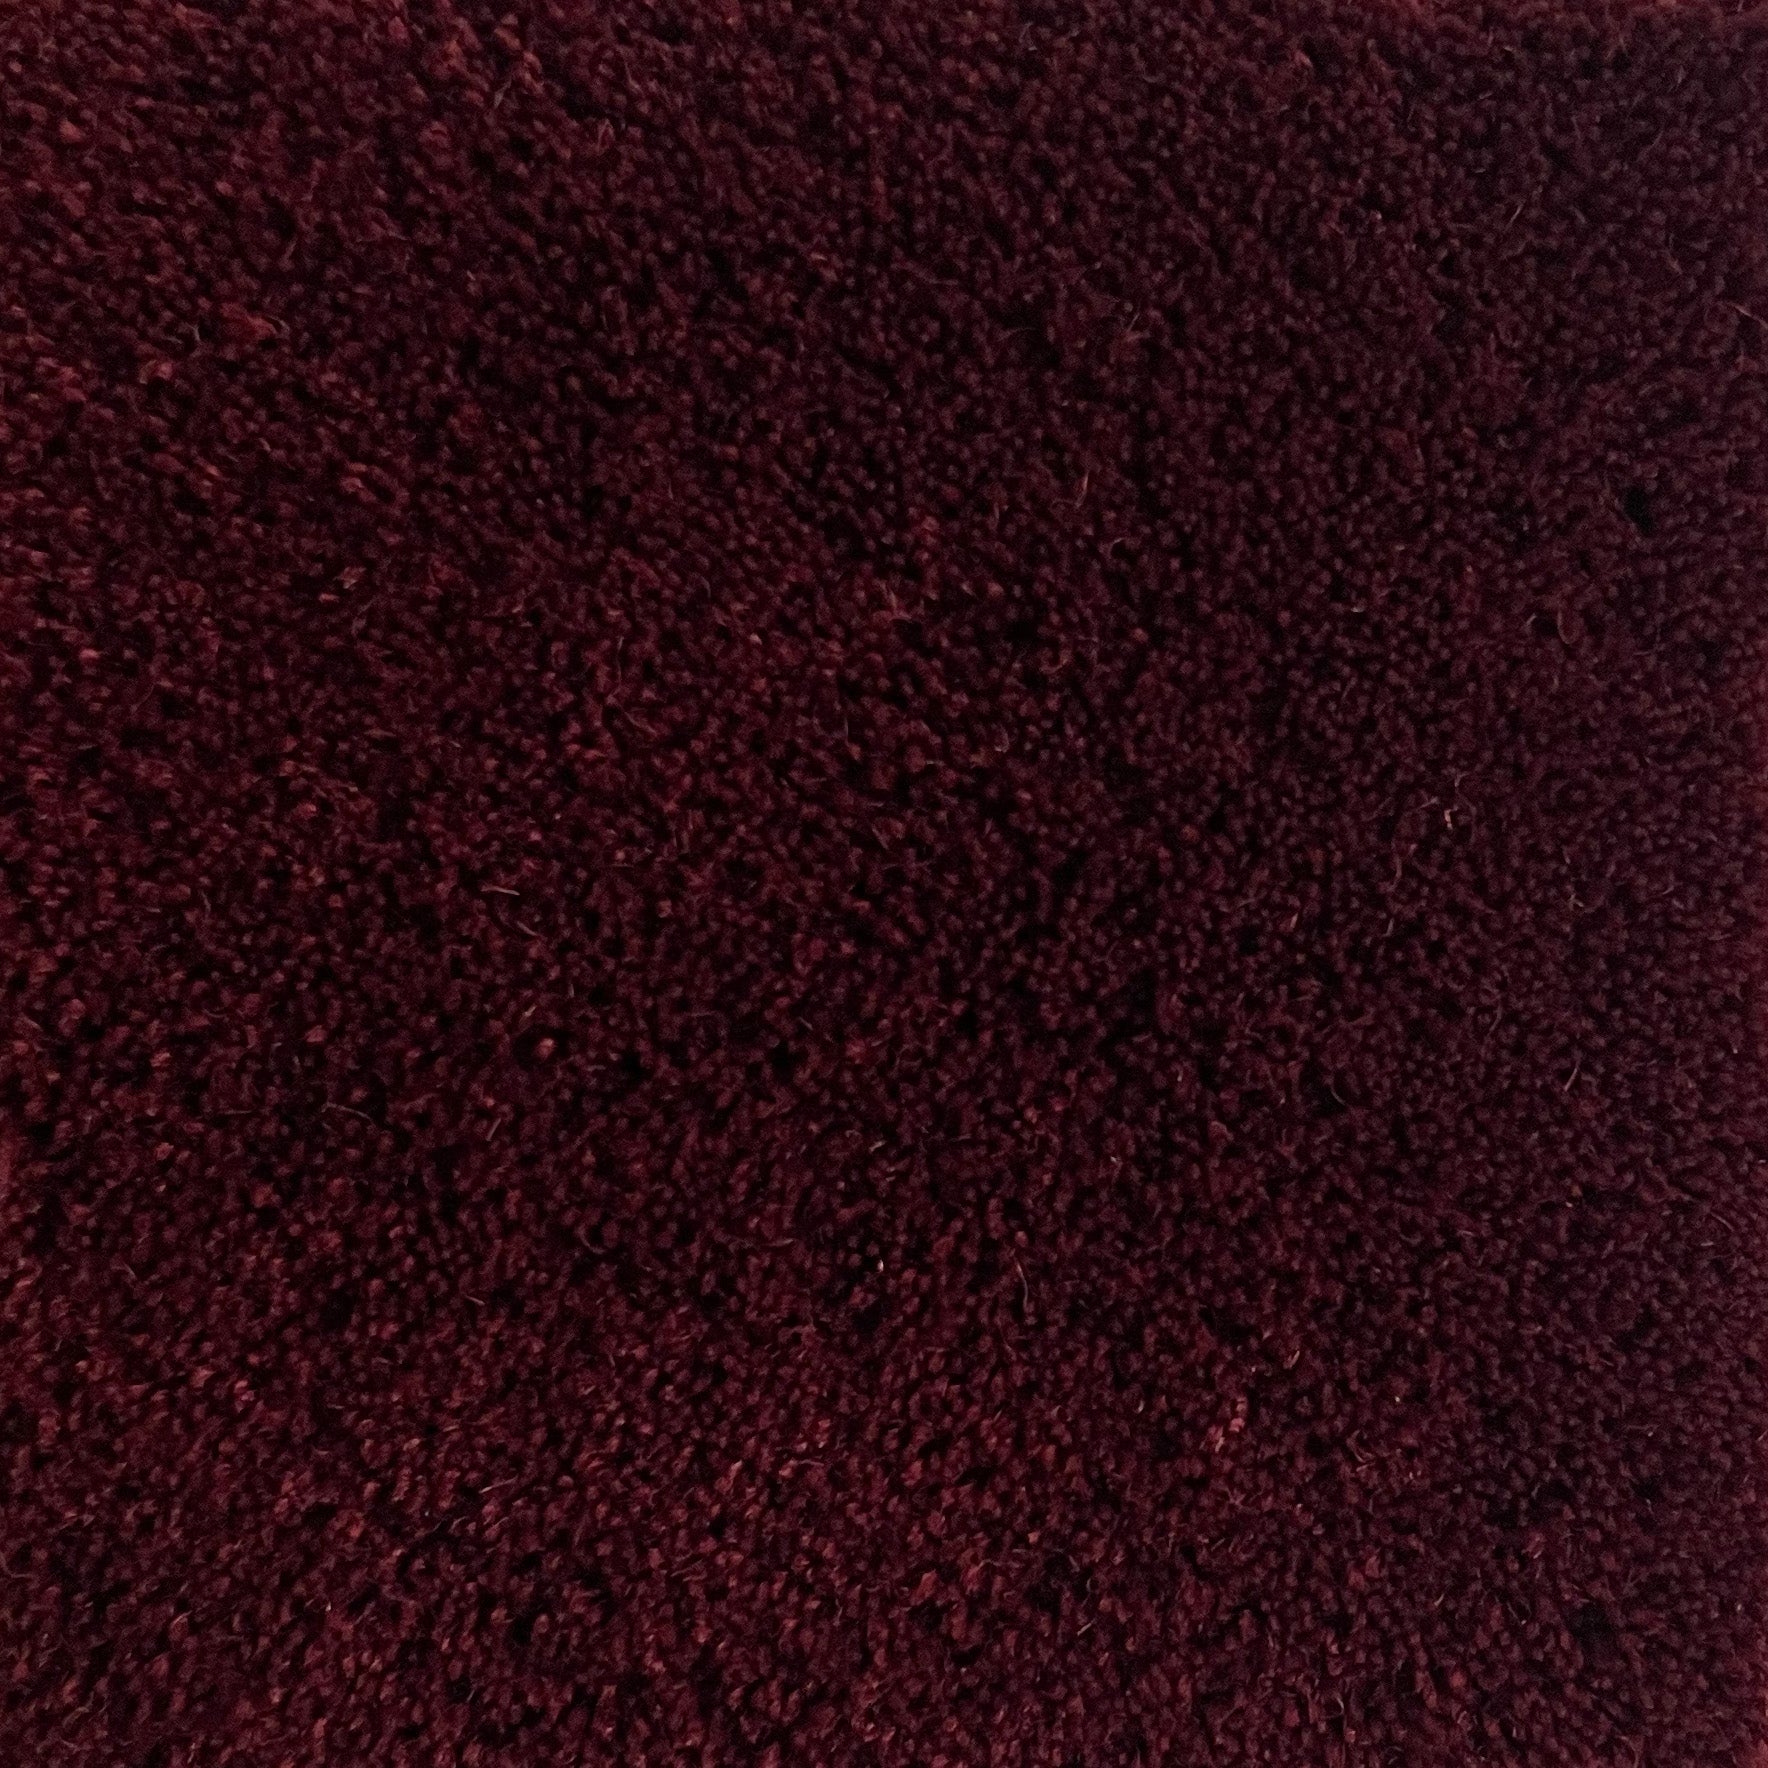 100% New Zealand Wool Rug Swatch in Ruby